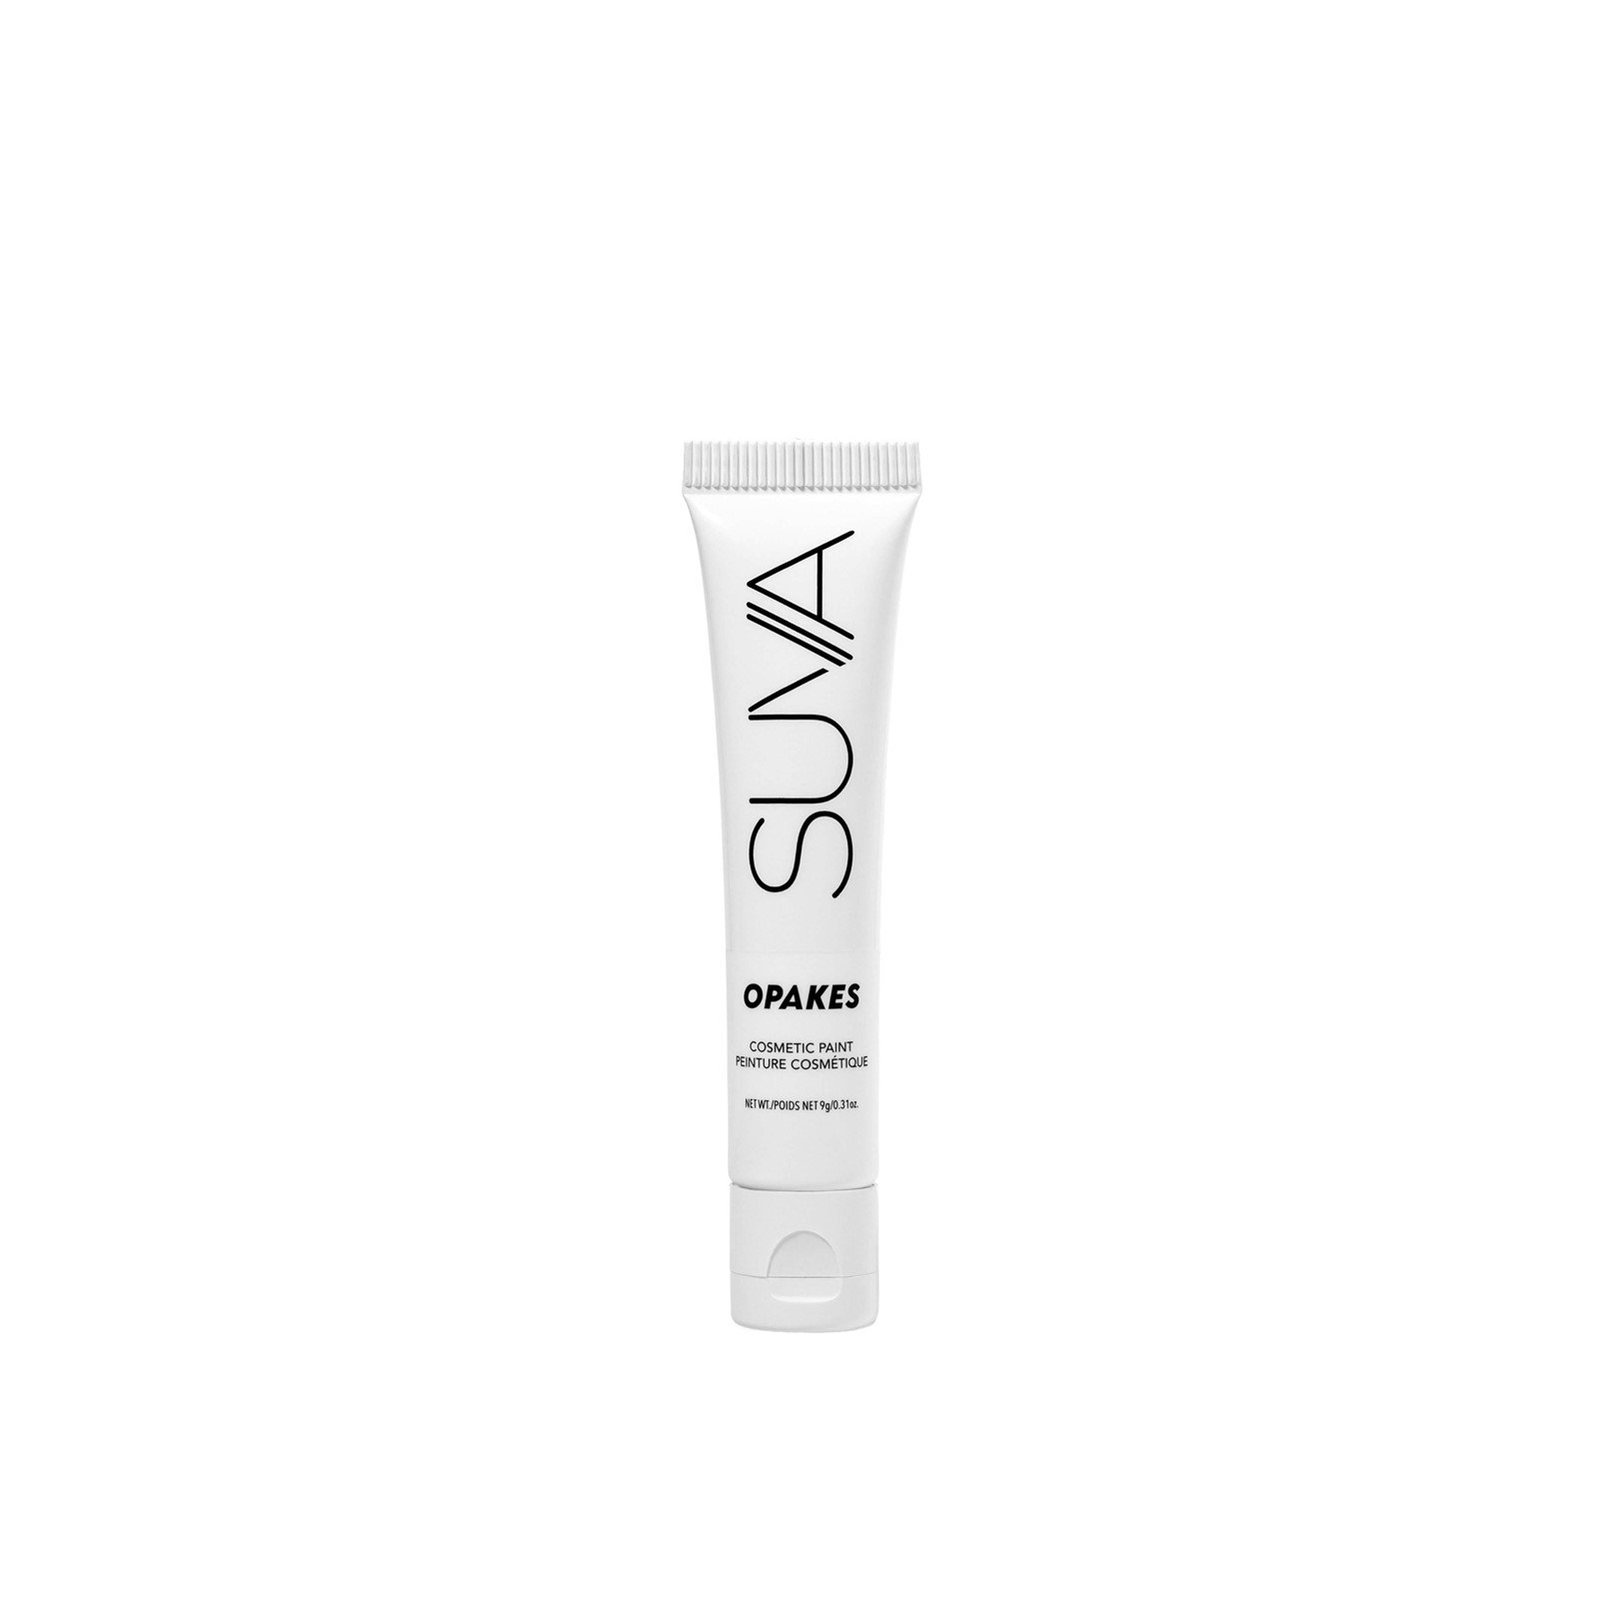 SUVA Beauty Opakes Cosmetic Paint Willy Nilly White 9g (0.31 oz)